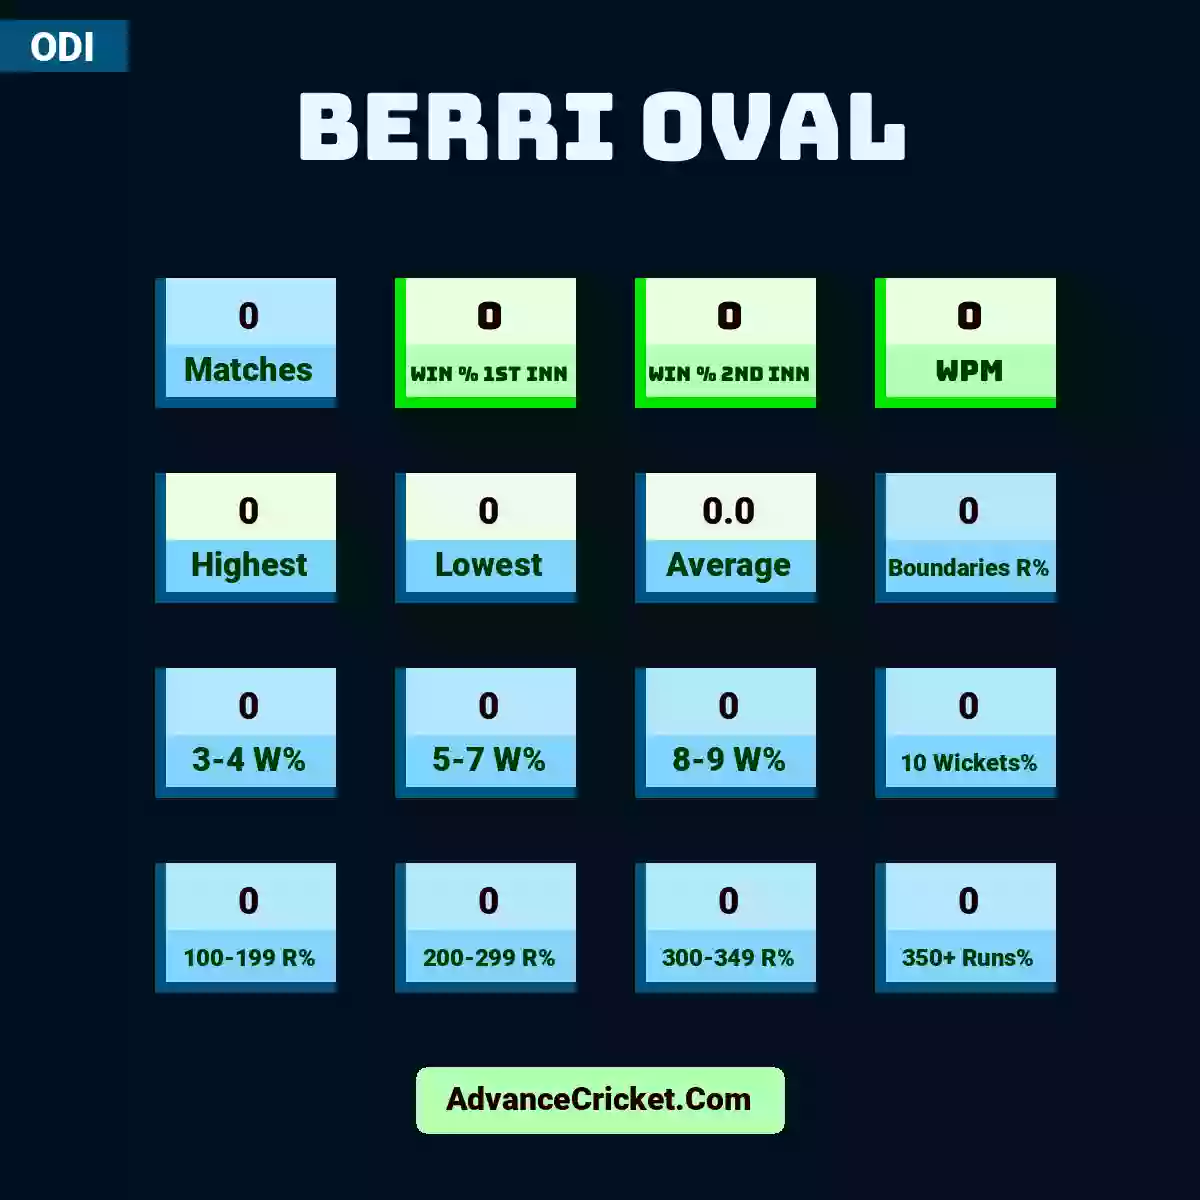 Image showing Berri Oval with Matches: 0, Win % 1st Inn: 0, Win % 2nd Inn: 0, WPM: 0, Highest: 0, Lowest: 0, Average: 0.0, Boundaries R%: 0, 3-4 W%: 0, 5-7 W%: 0, 8-9 W%: 0, 10 Wickets%: 0, 100-199 R%: 0, 200-299 R%: 0, 300-349 R%: 0, 350+ Runs%: 0.